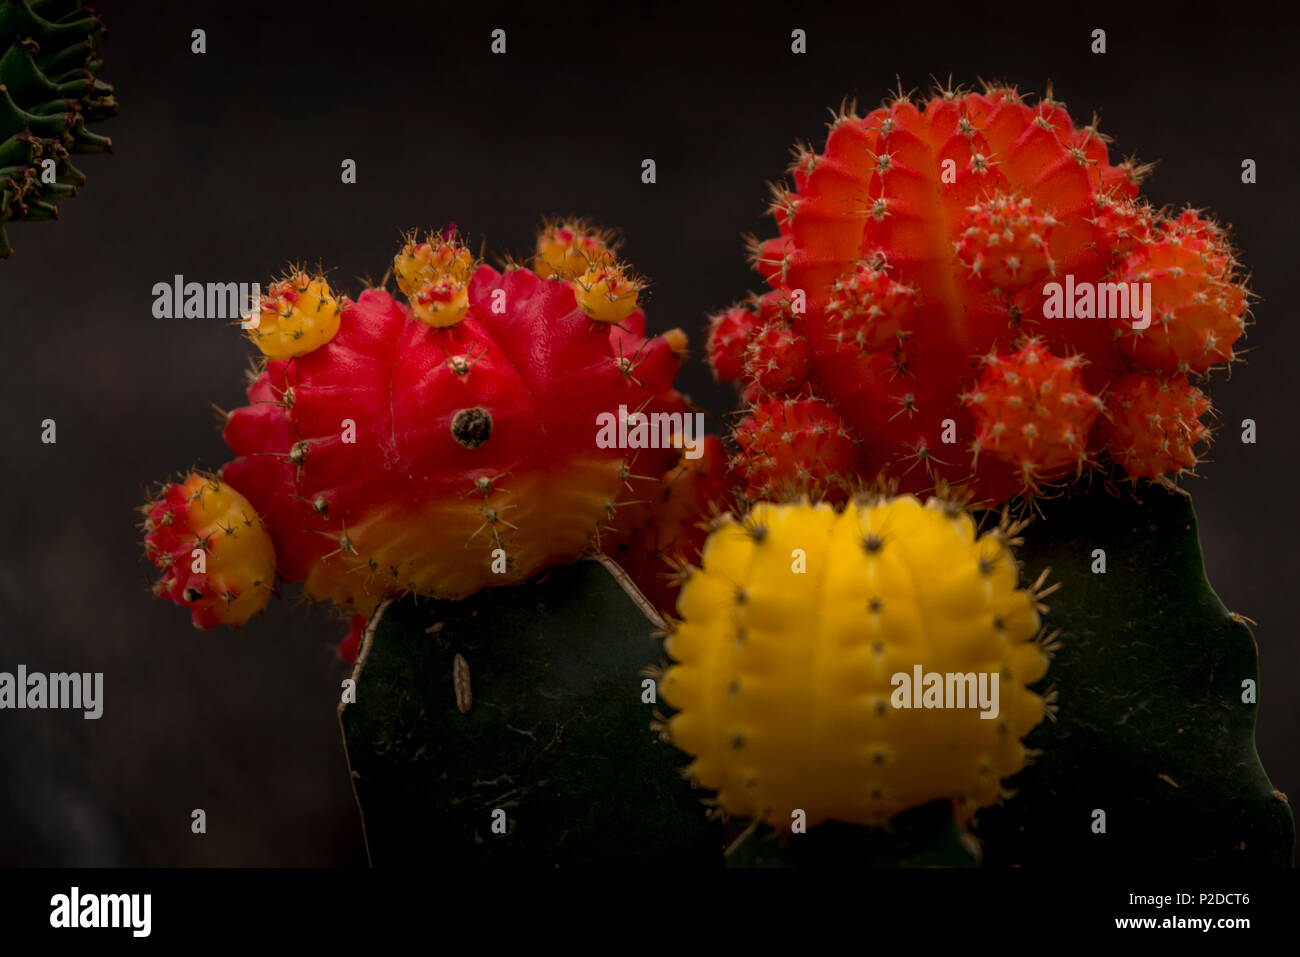 Red and yellow cactus image also called Cactaceae Stock Photo